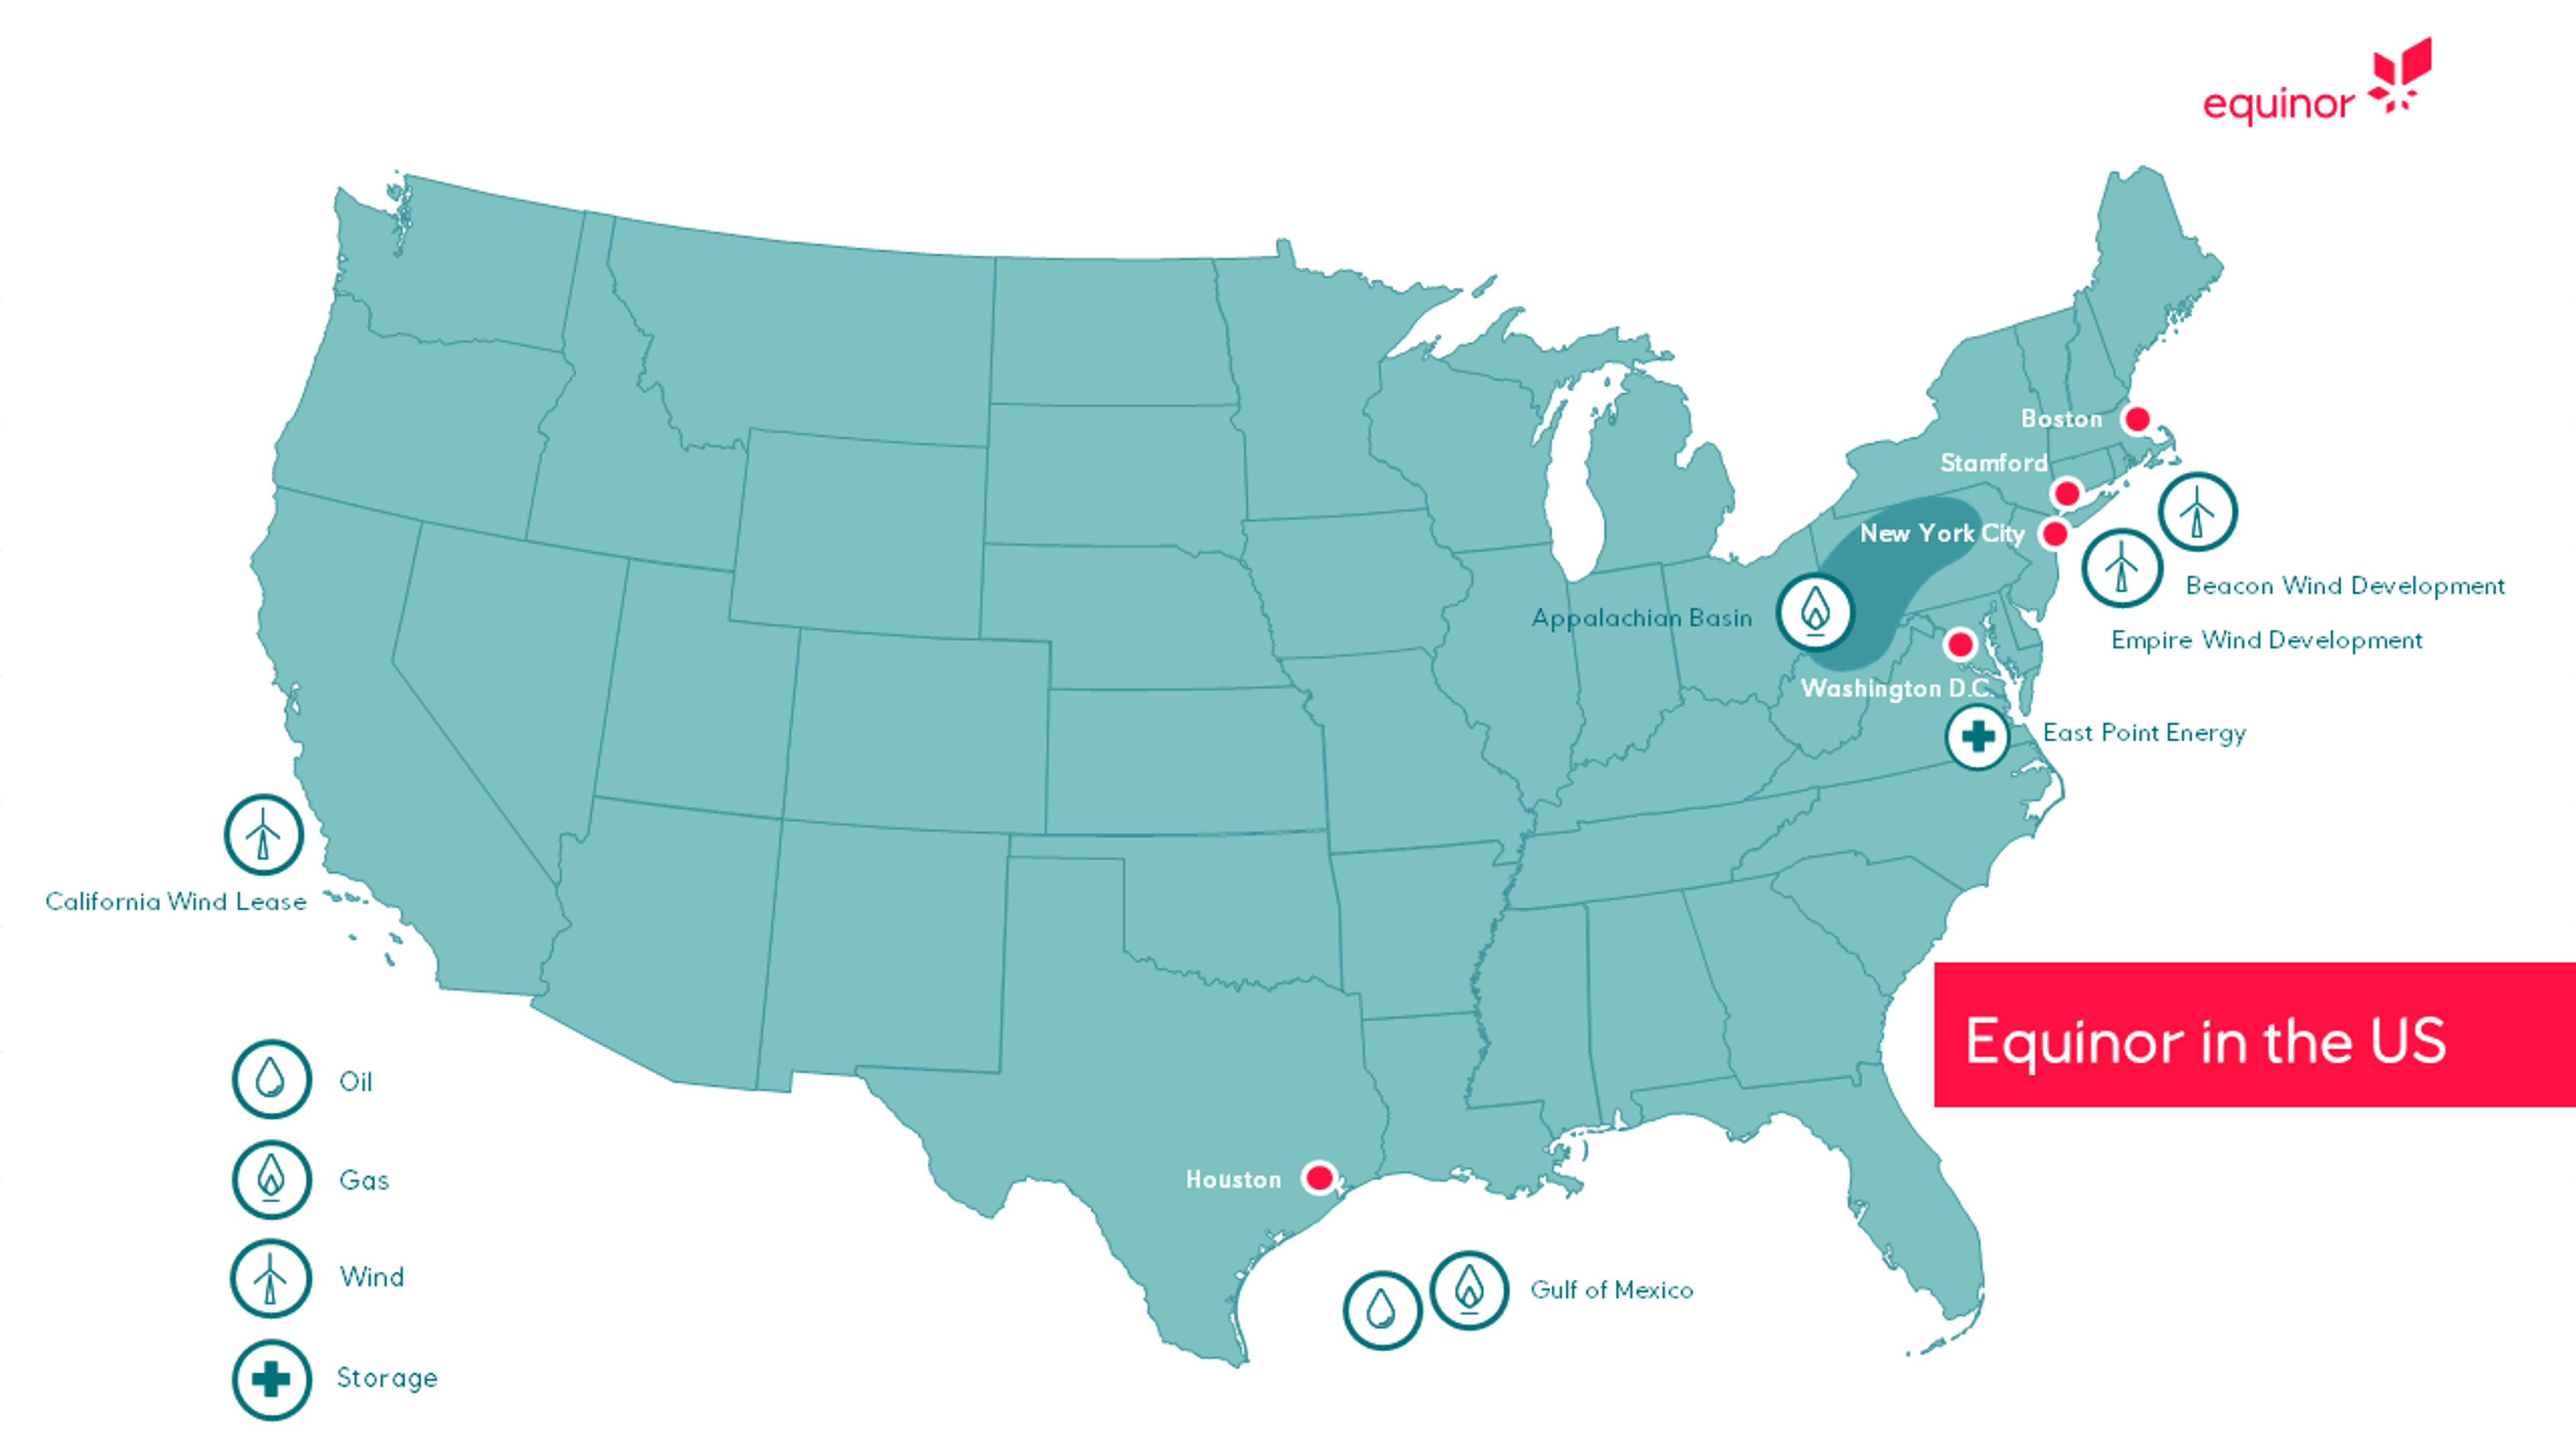 Map of the US showing Equinor's offices and oil, gas and wind assets